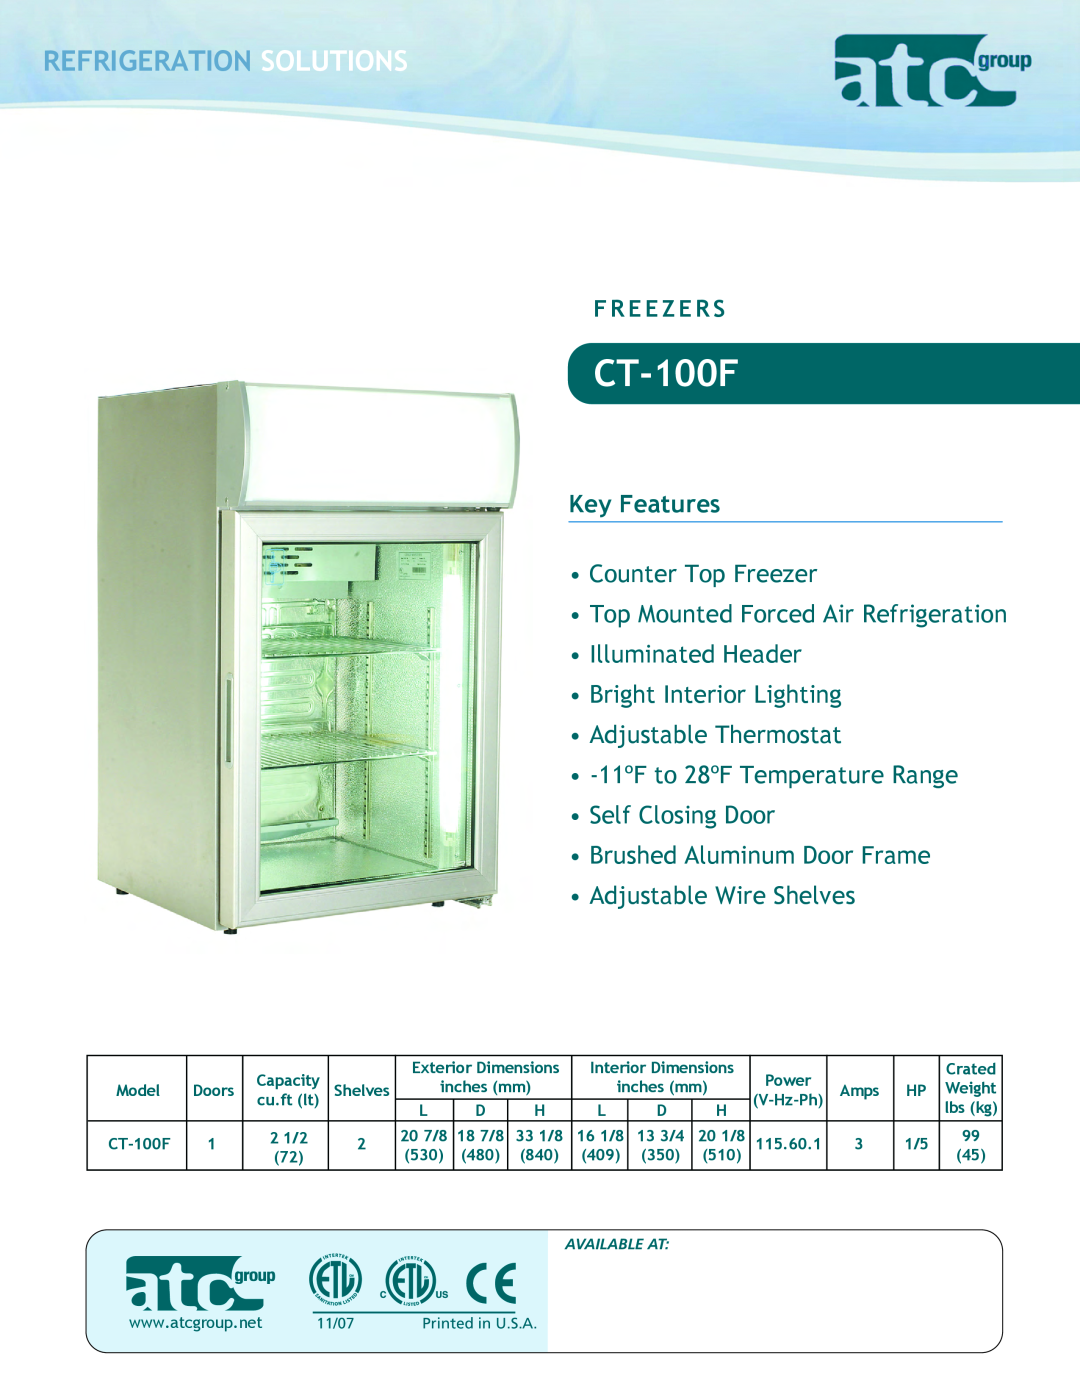 ATC Group CT100 dimensions Refrigeration Solutions, CT-100F, Key Features 